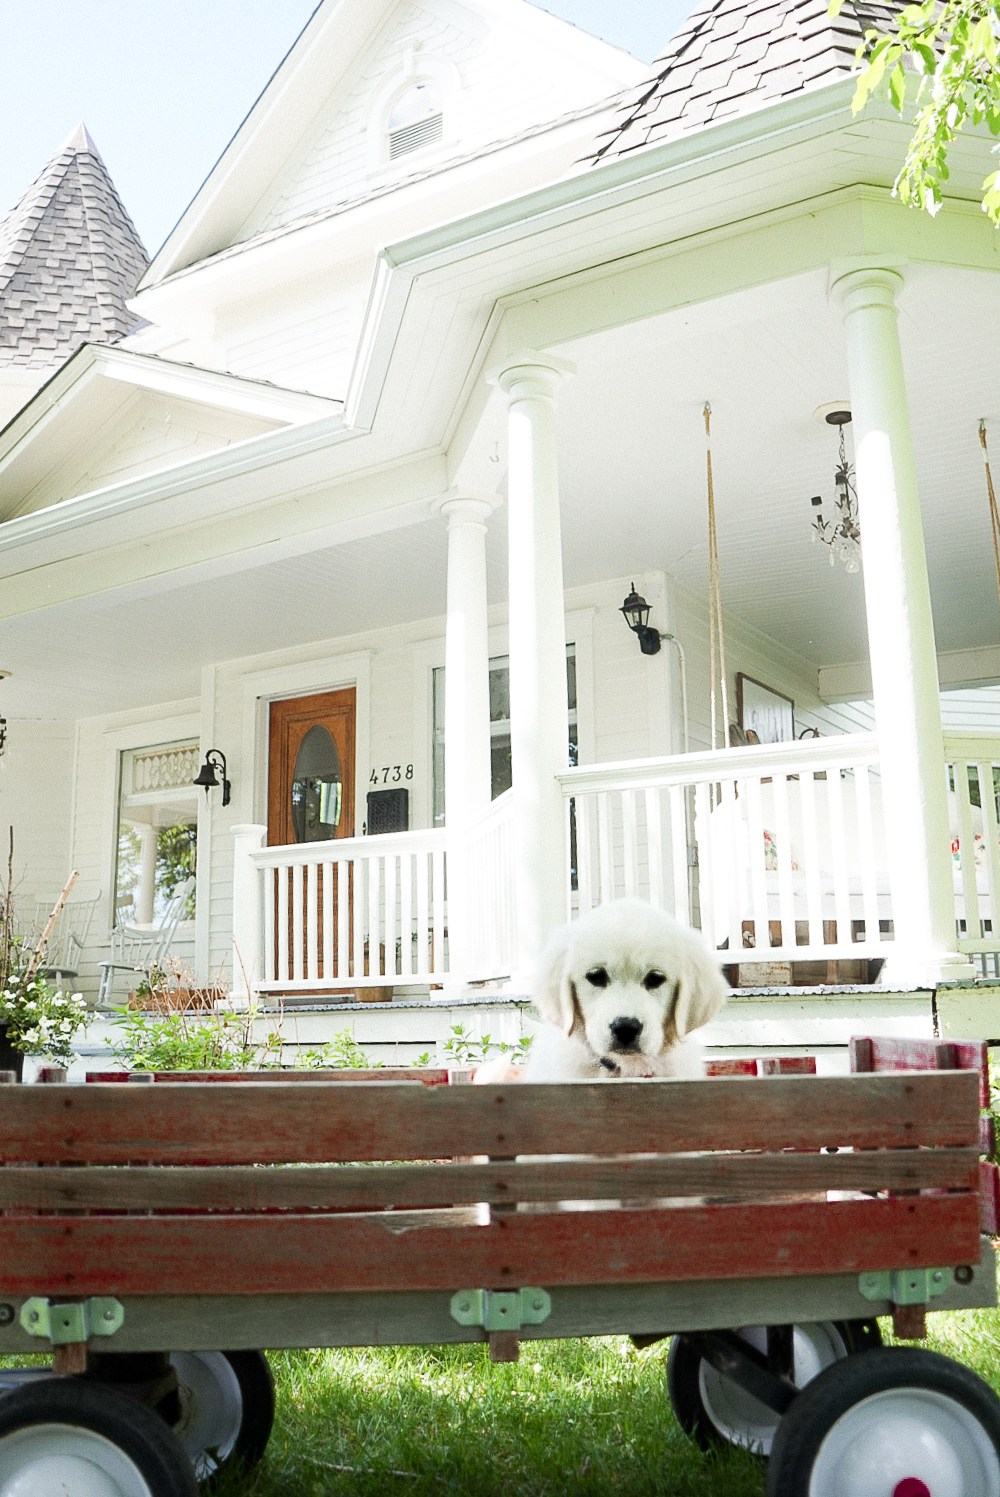 Eclectic Home Tour - love this charming old home with beautiful porch kellyelko.com #oldhome #porch #hometour